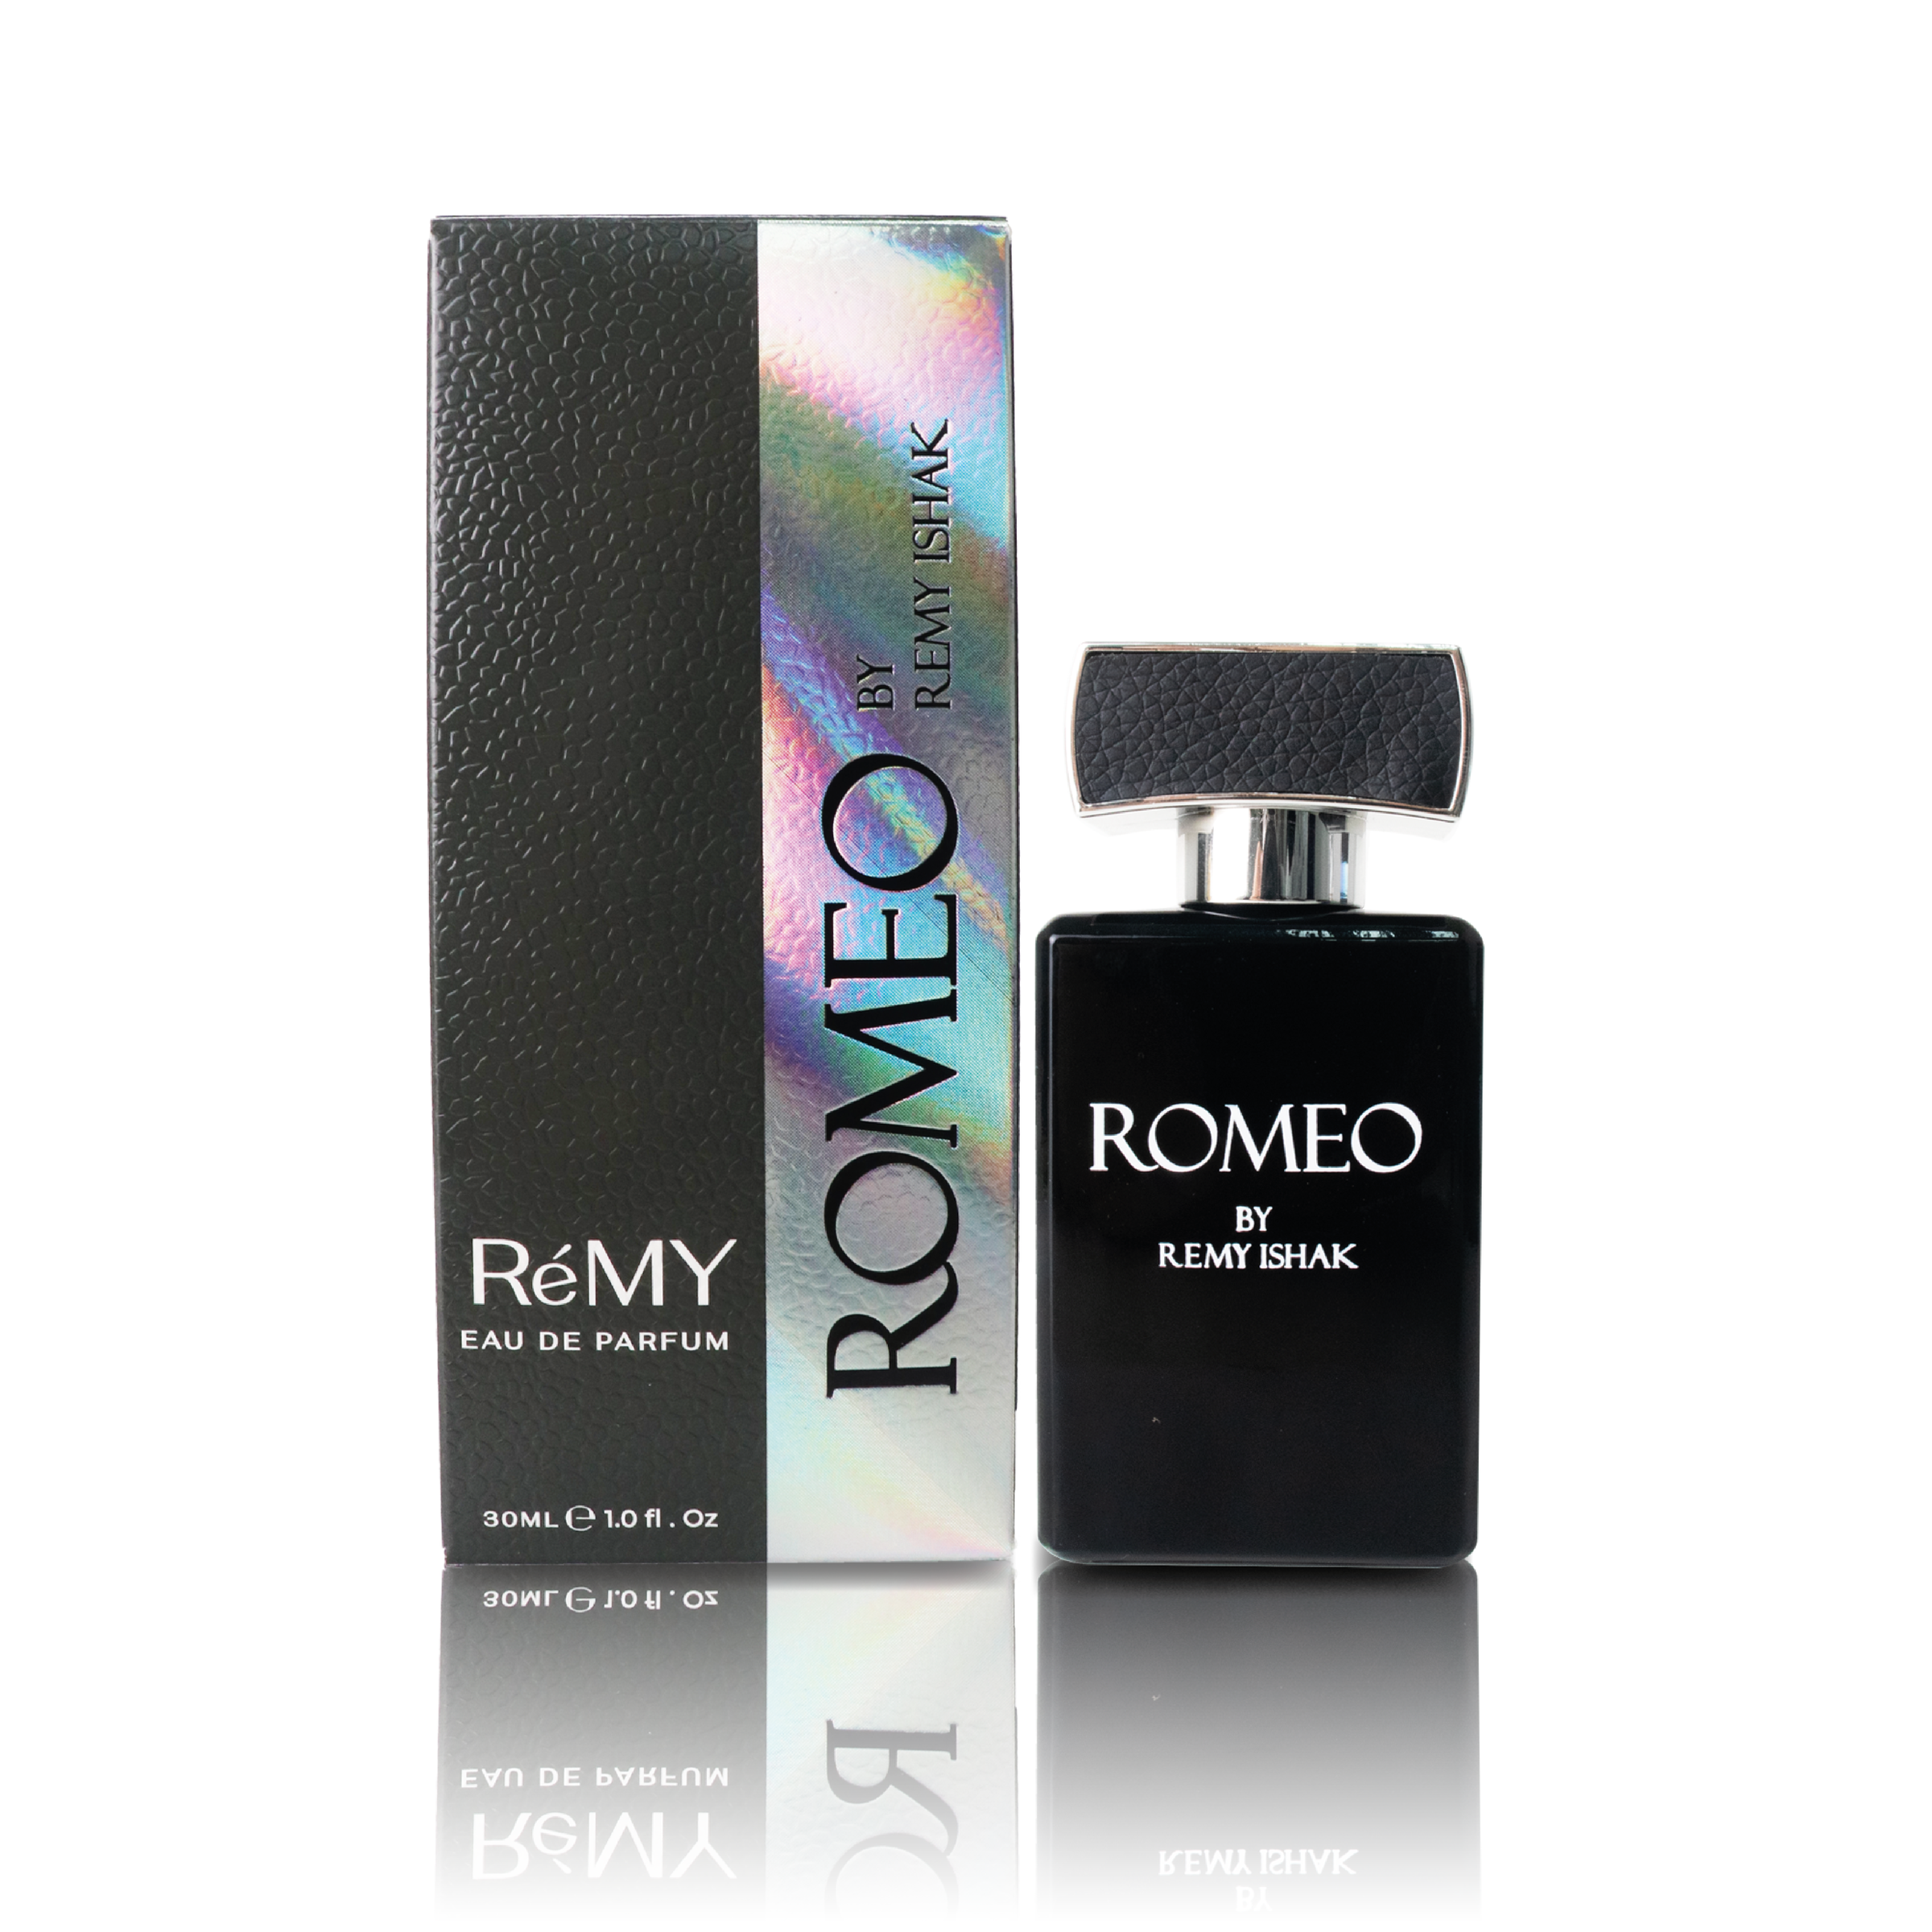 REMY ROMEO MAIN COVER-01